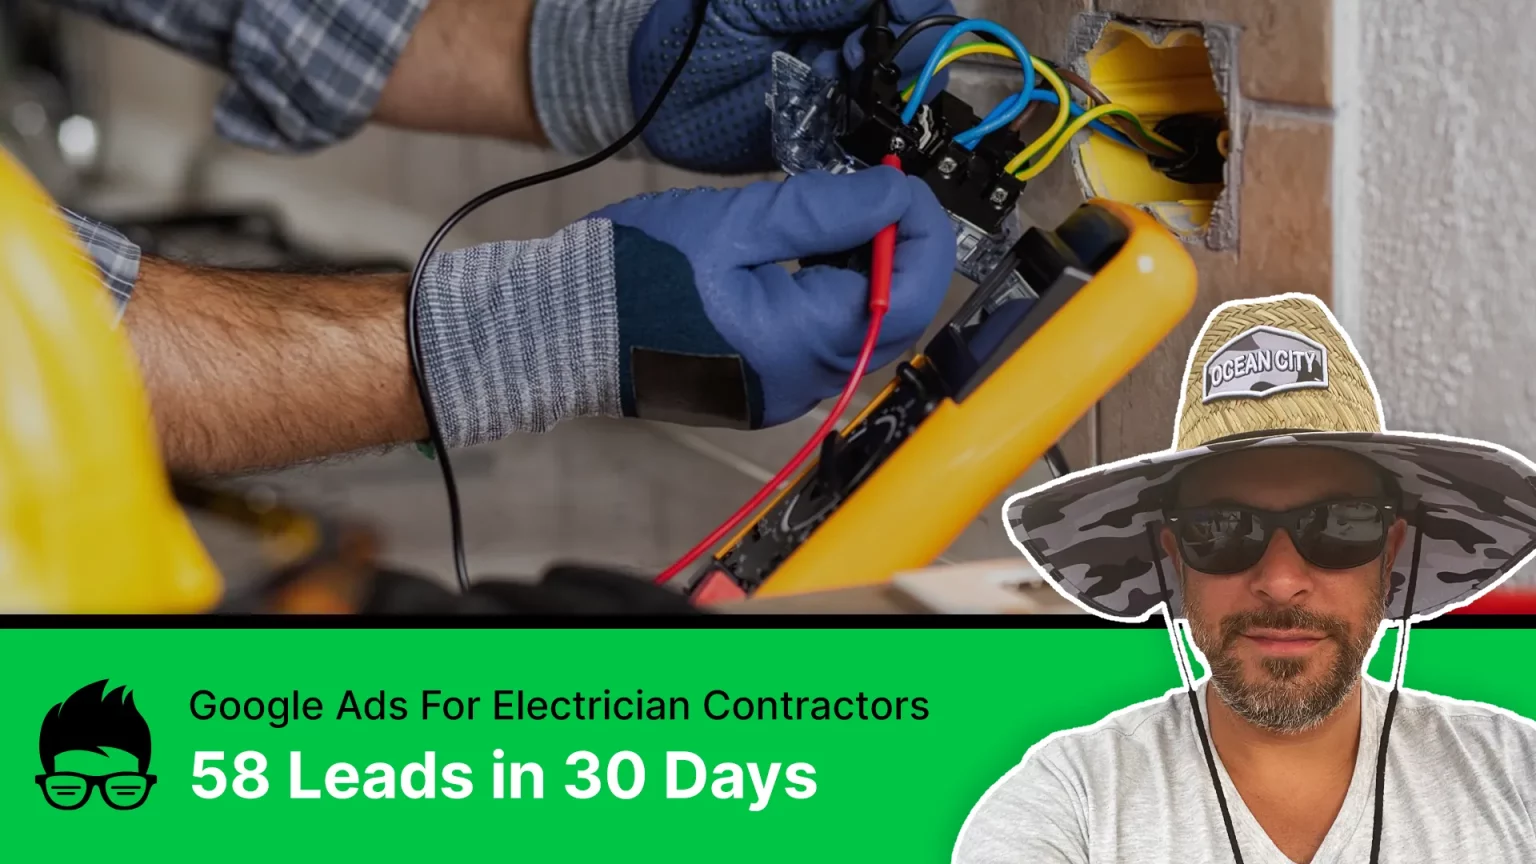 Google Ads Case Study - Electrician Contractor PPC Ads